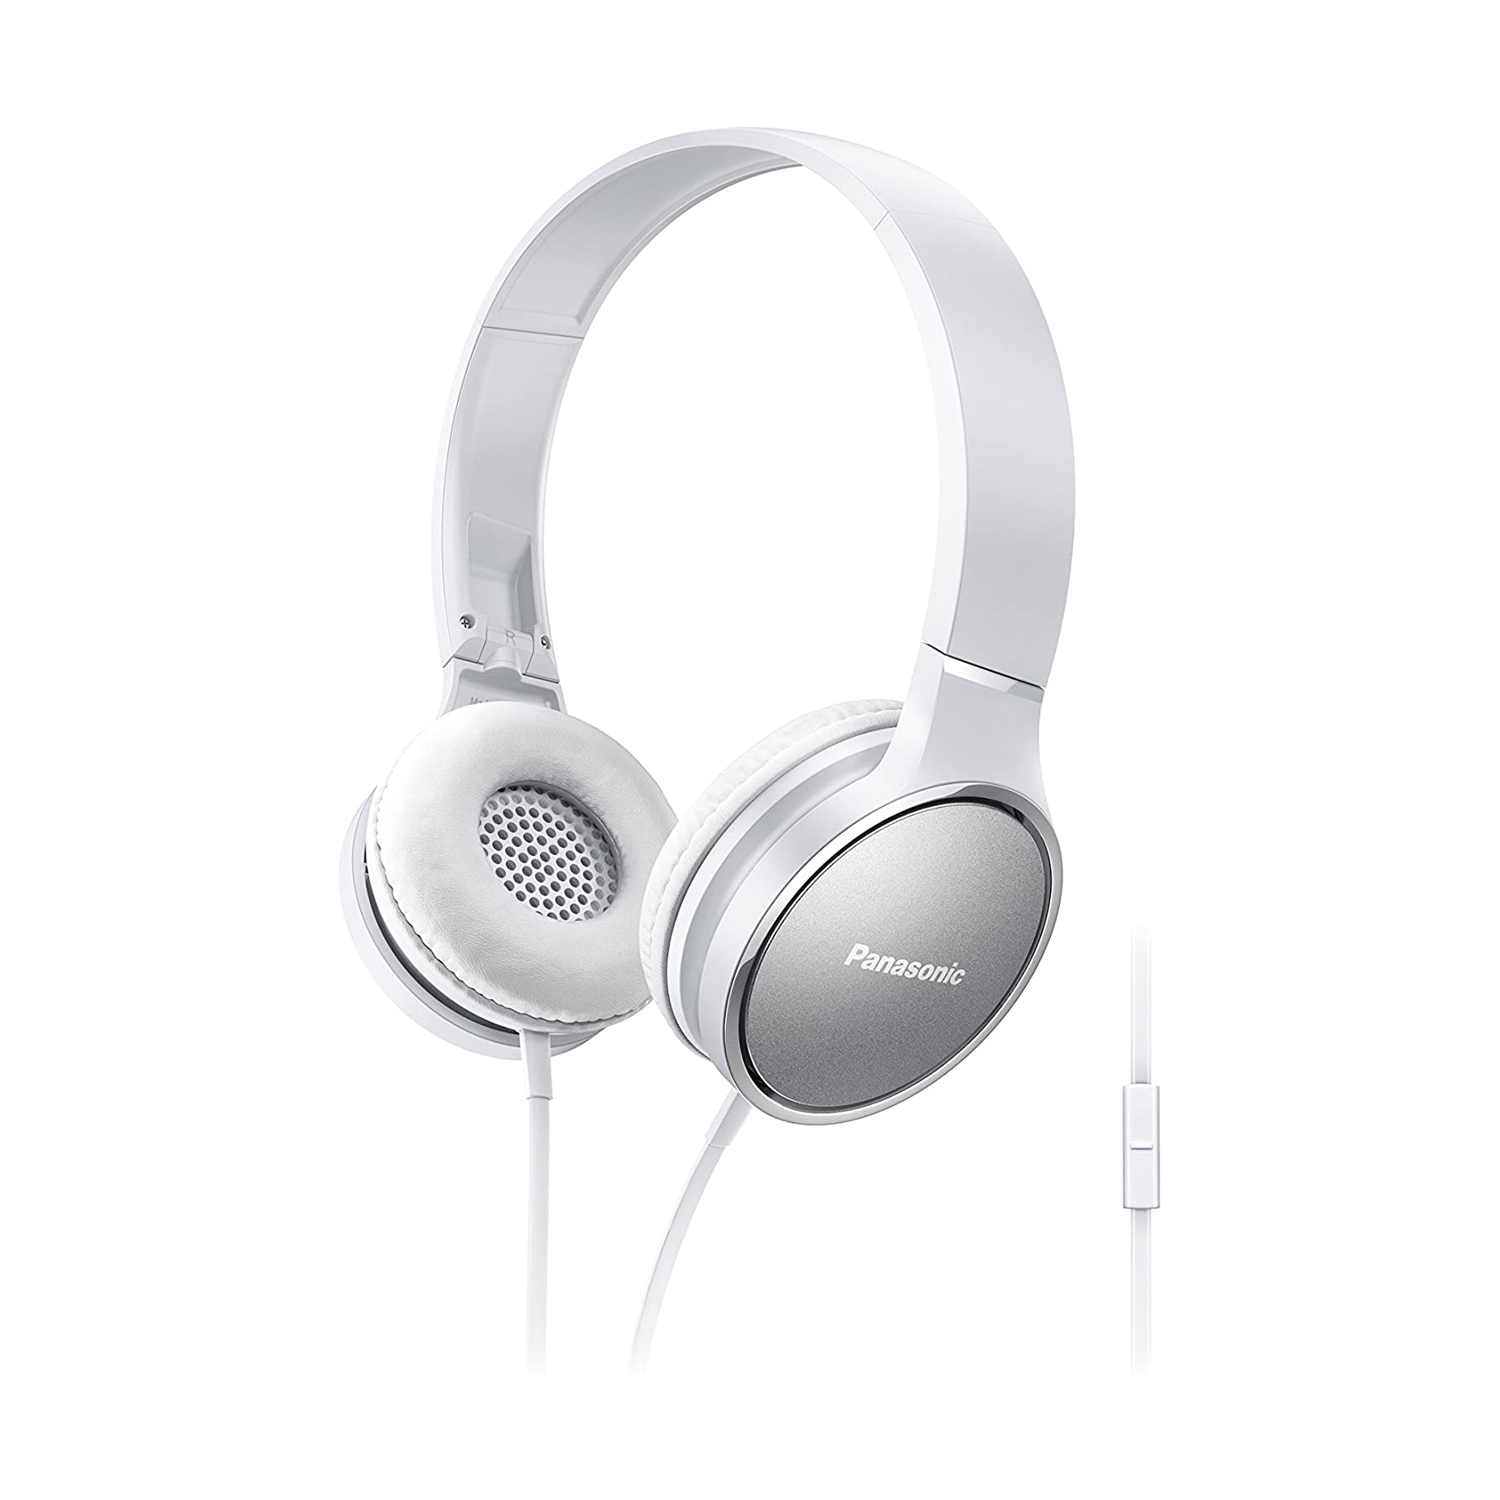 Panasonic Premium Sound On Ear Stereo Headphones RP-HF300M with Integrated Mic and Controller  - White